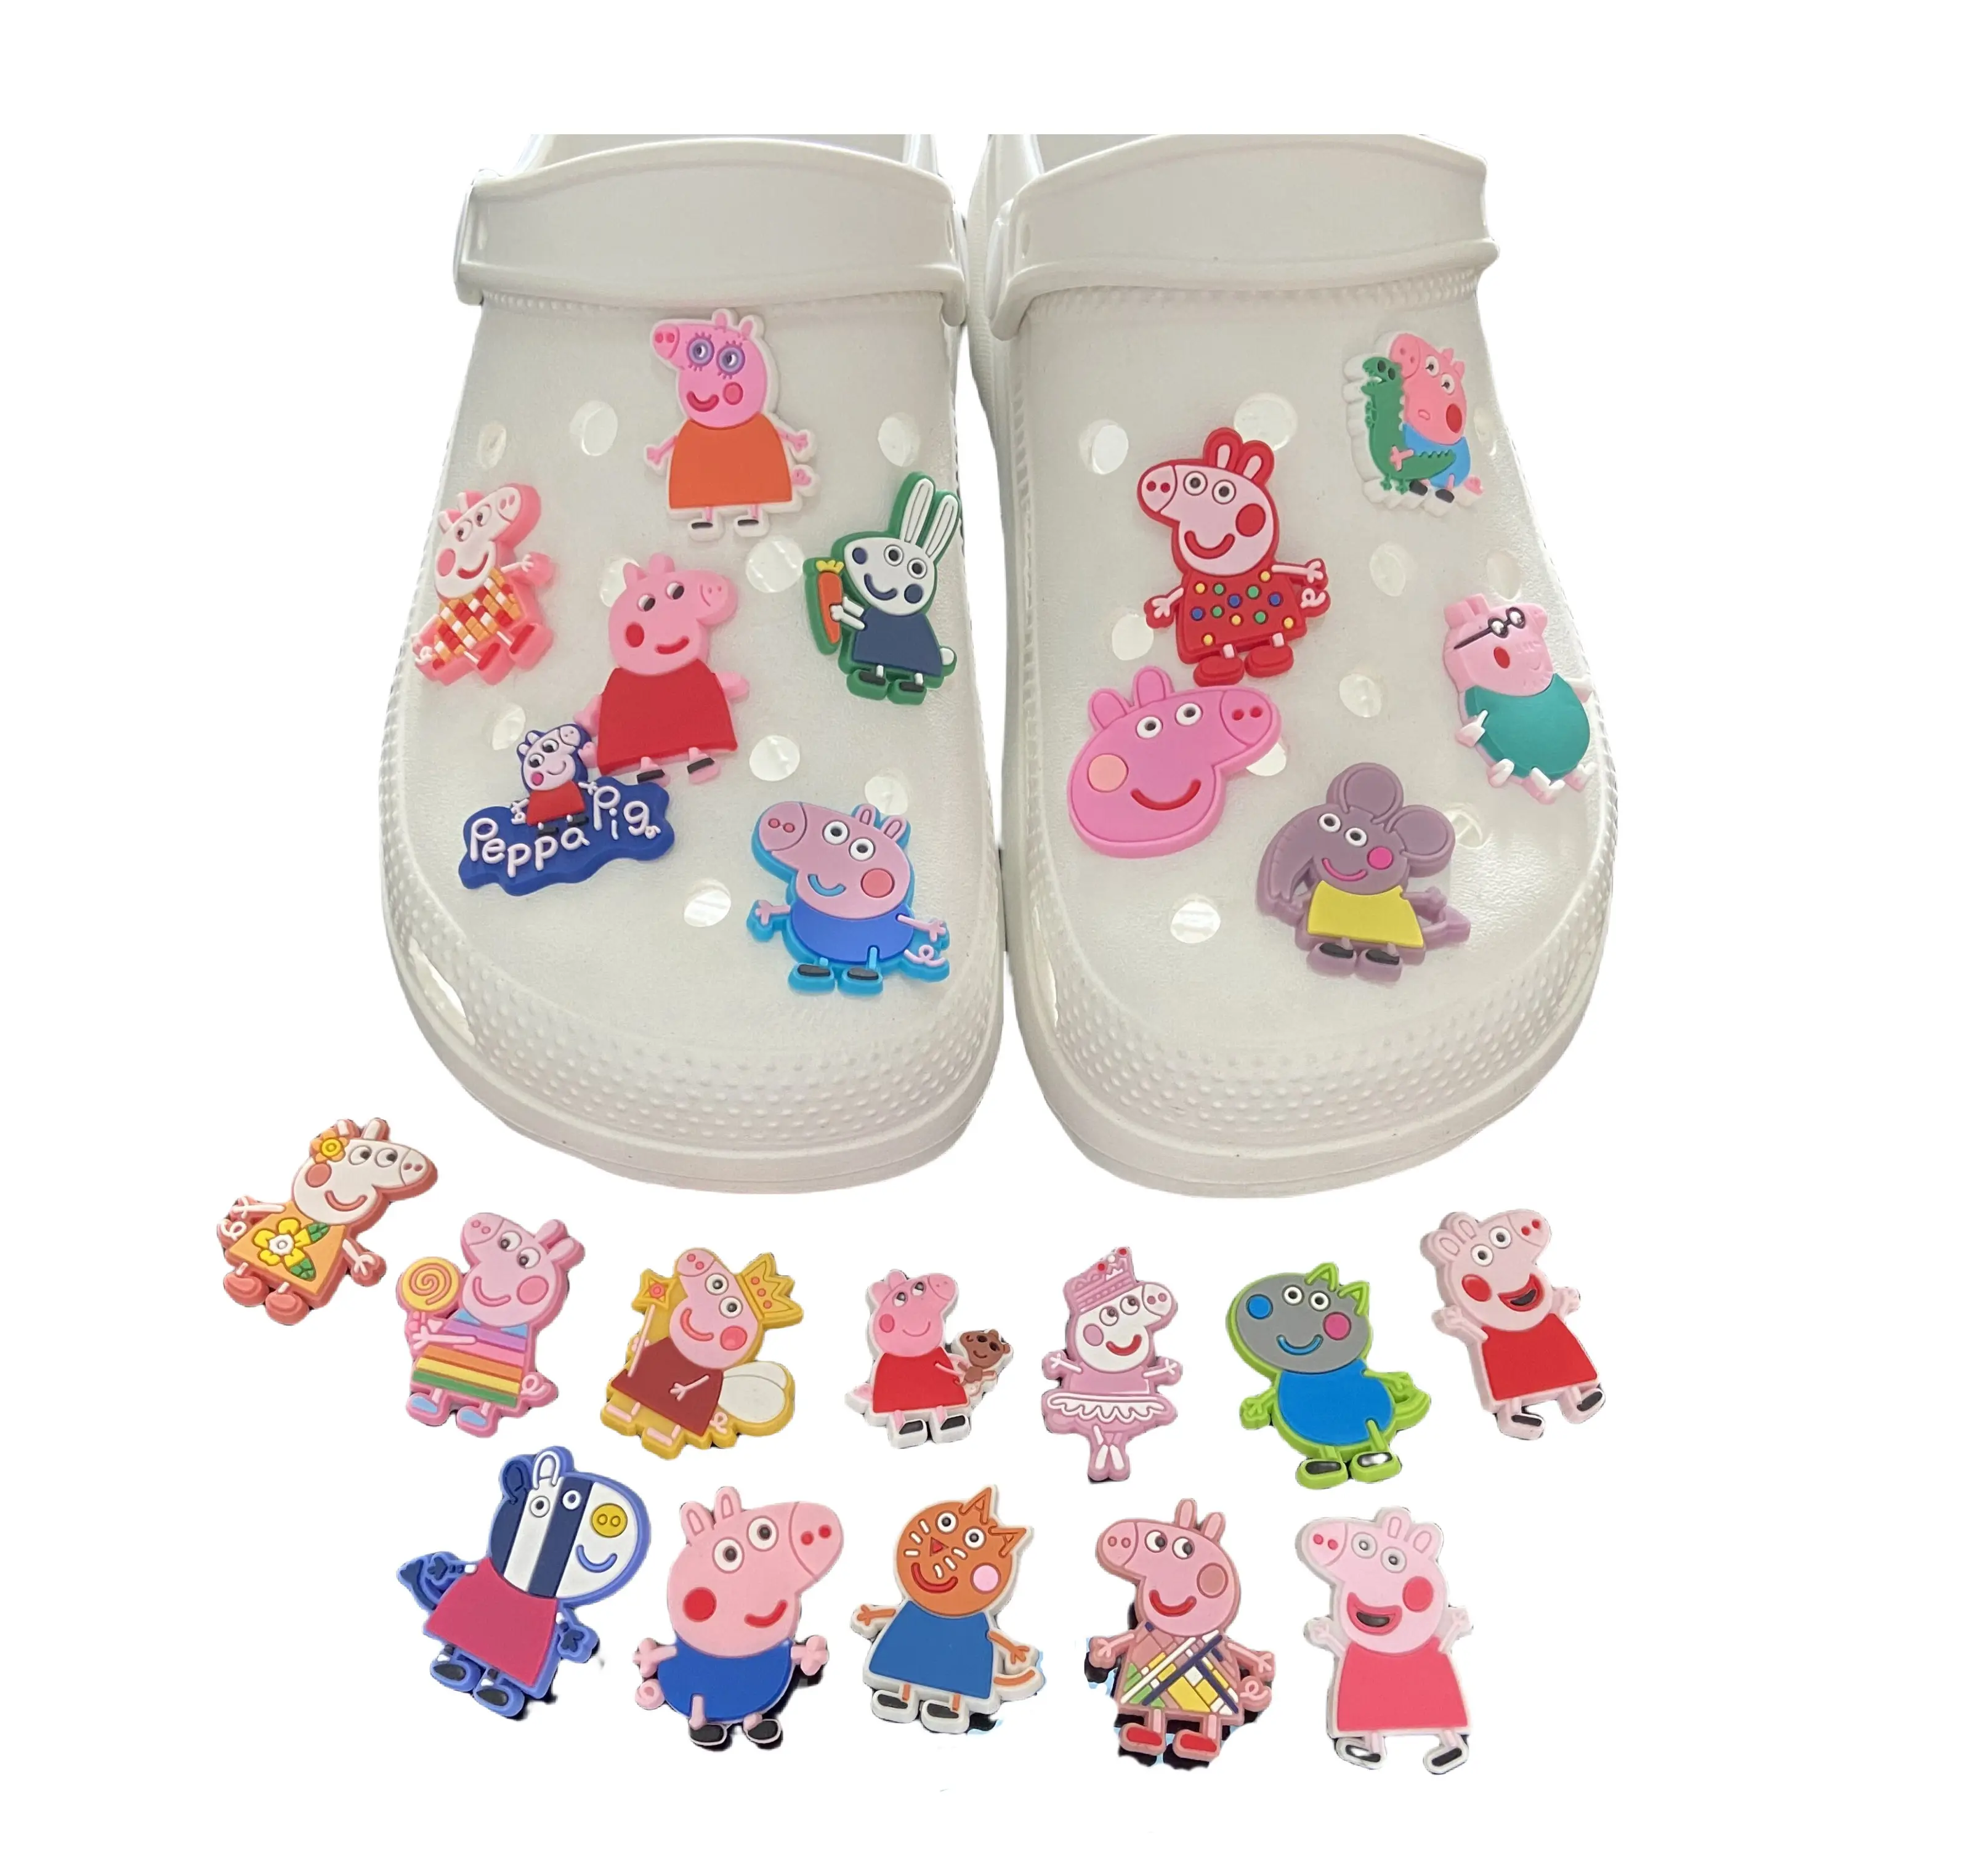 New Design Soft Pvc Pink Pepa pig accessories shoe Charm Wholesale Doll Style Shoe Accessories With Shoe Decoration Charms